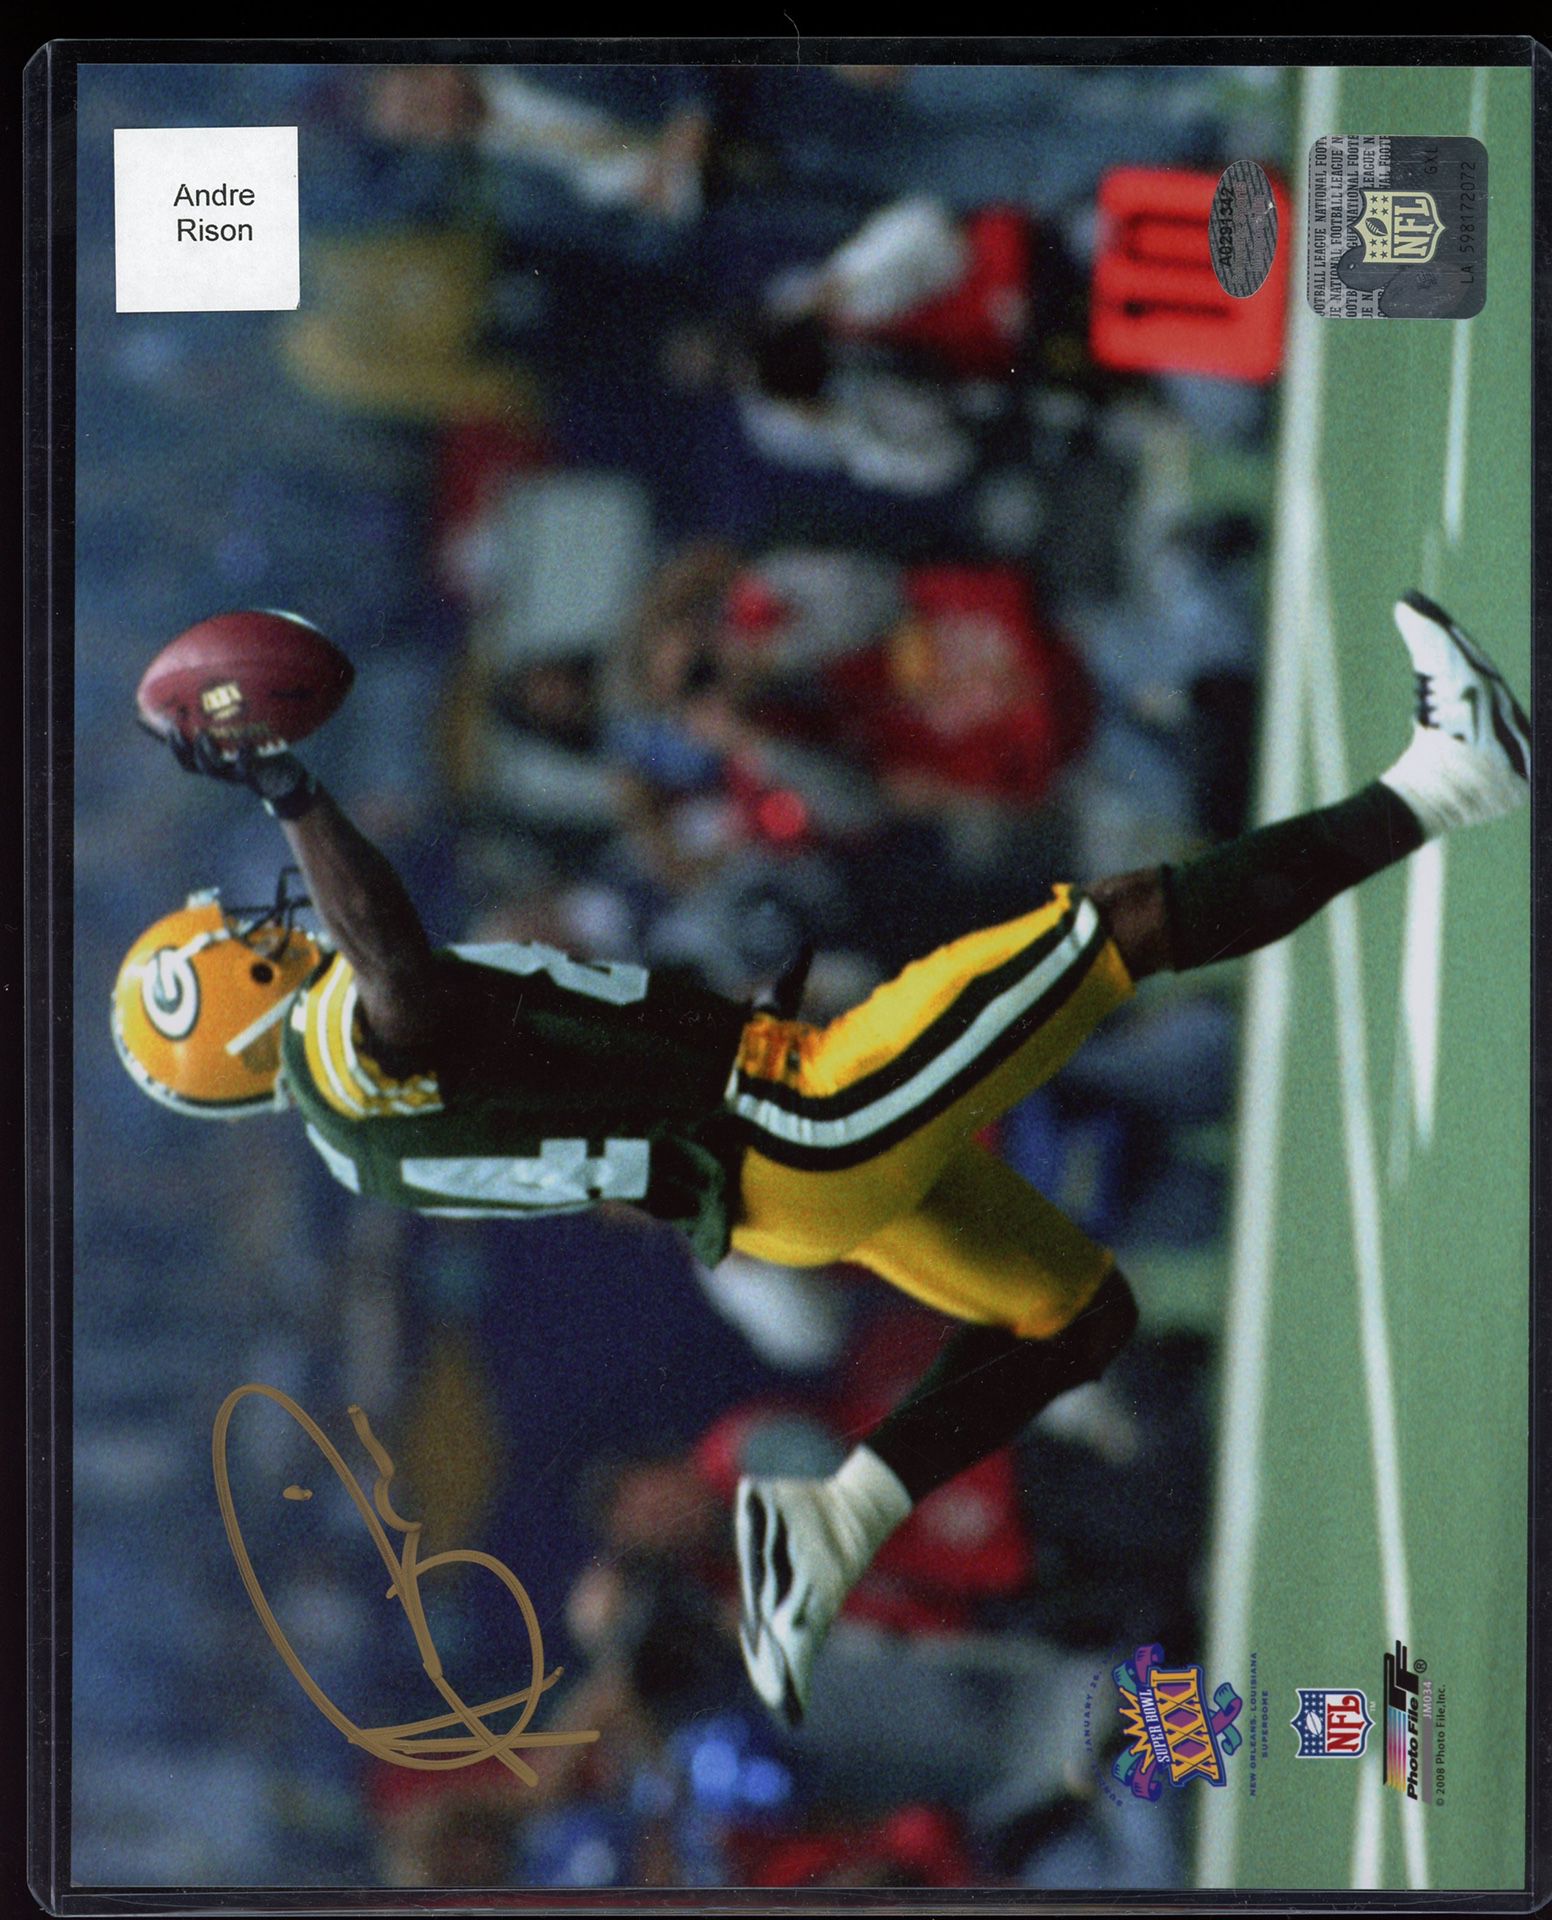 Andre Rison Green Bay Packers Signed 8X10 Photo (Schwartz COA) 